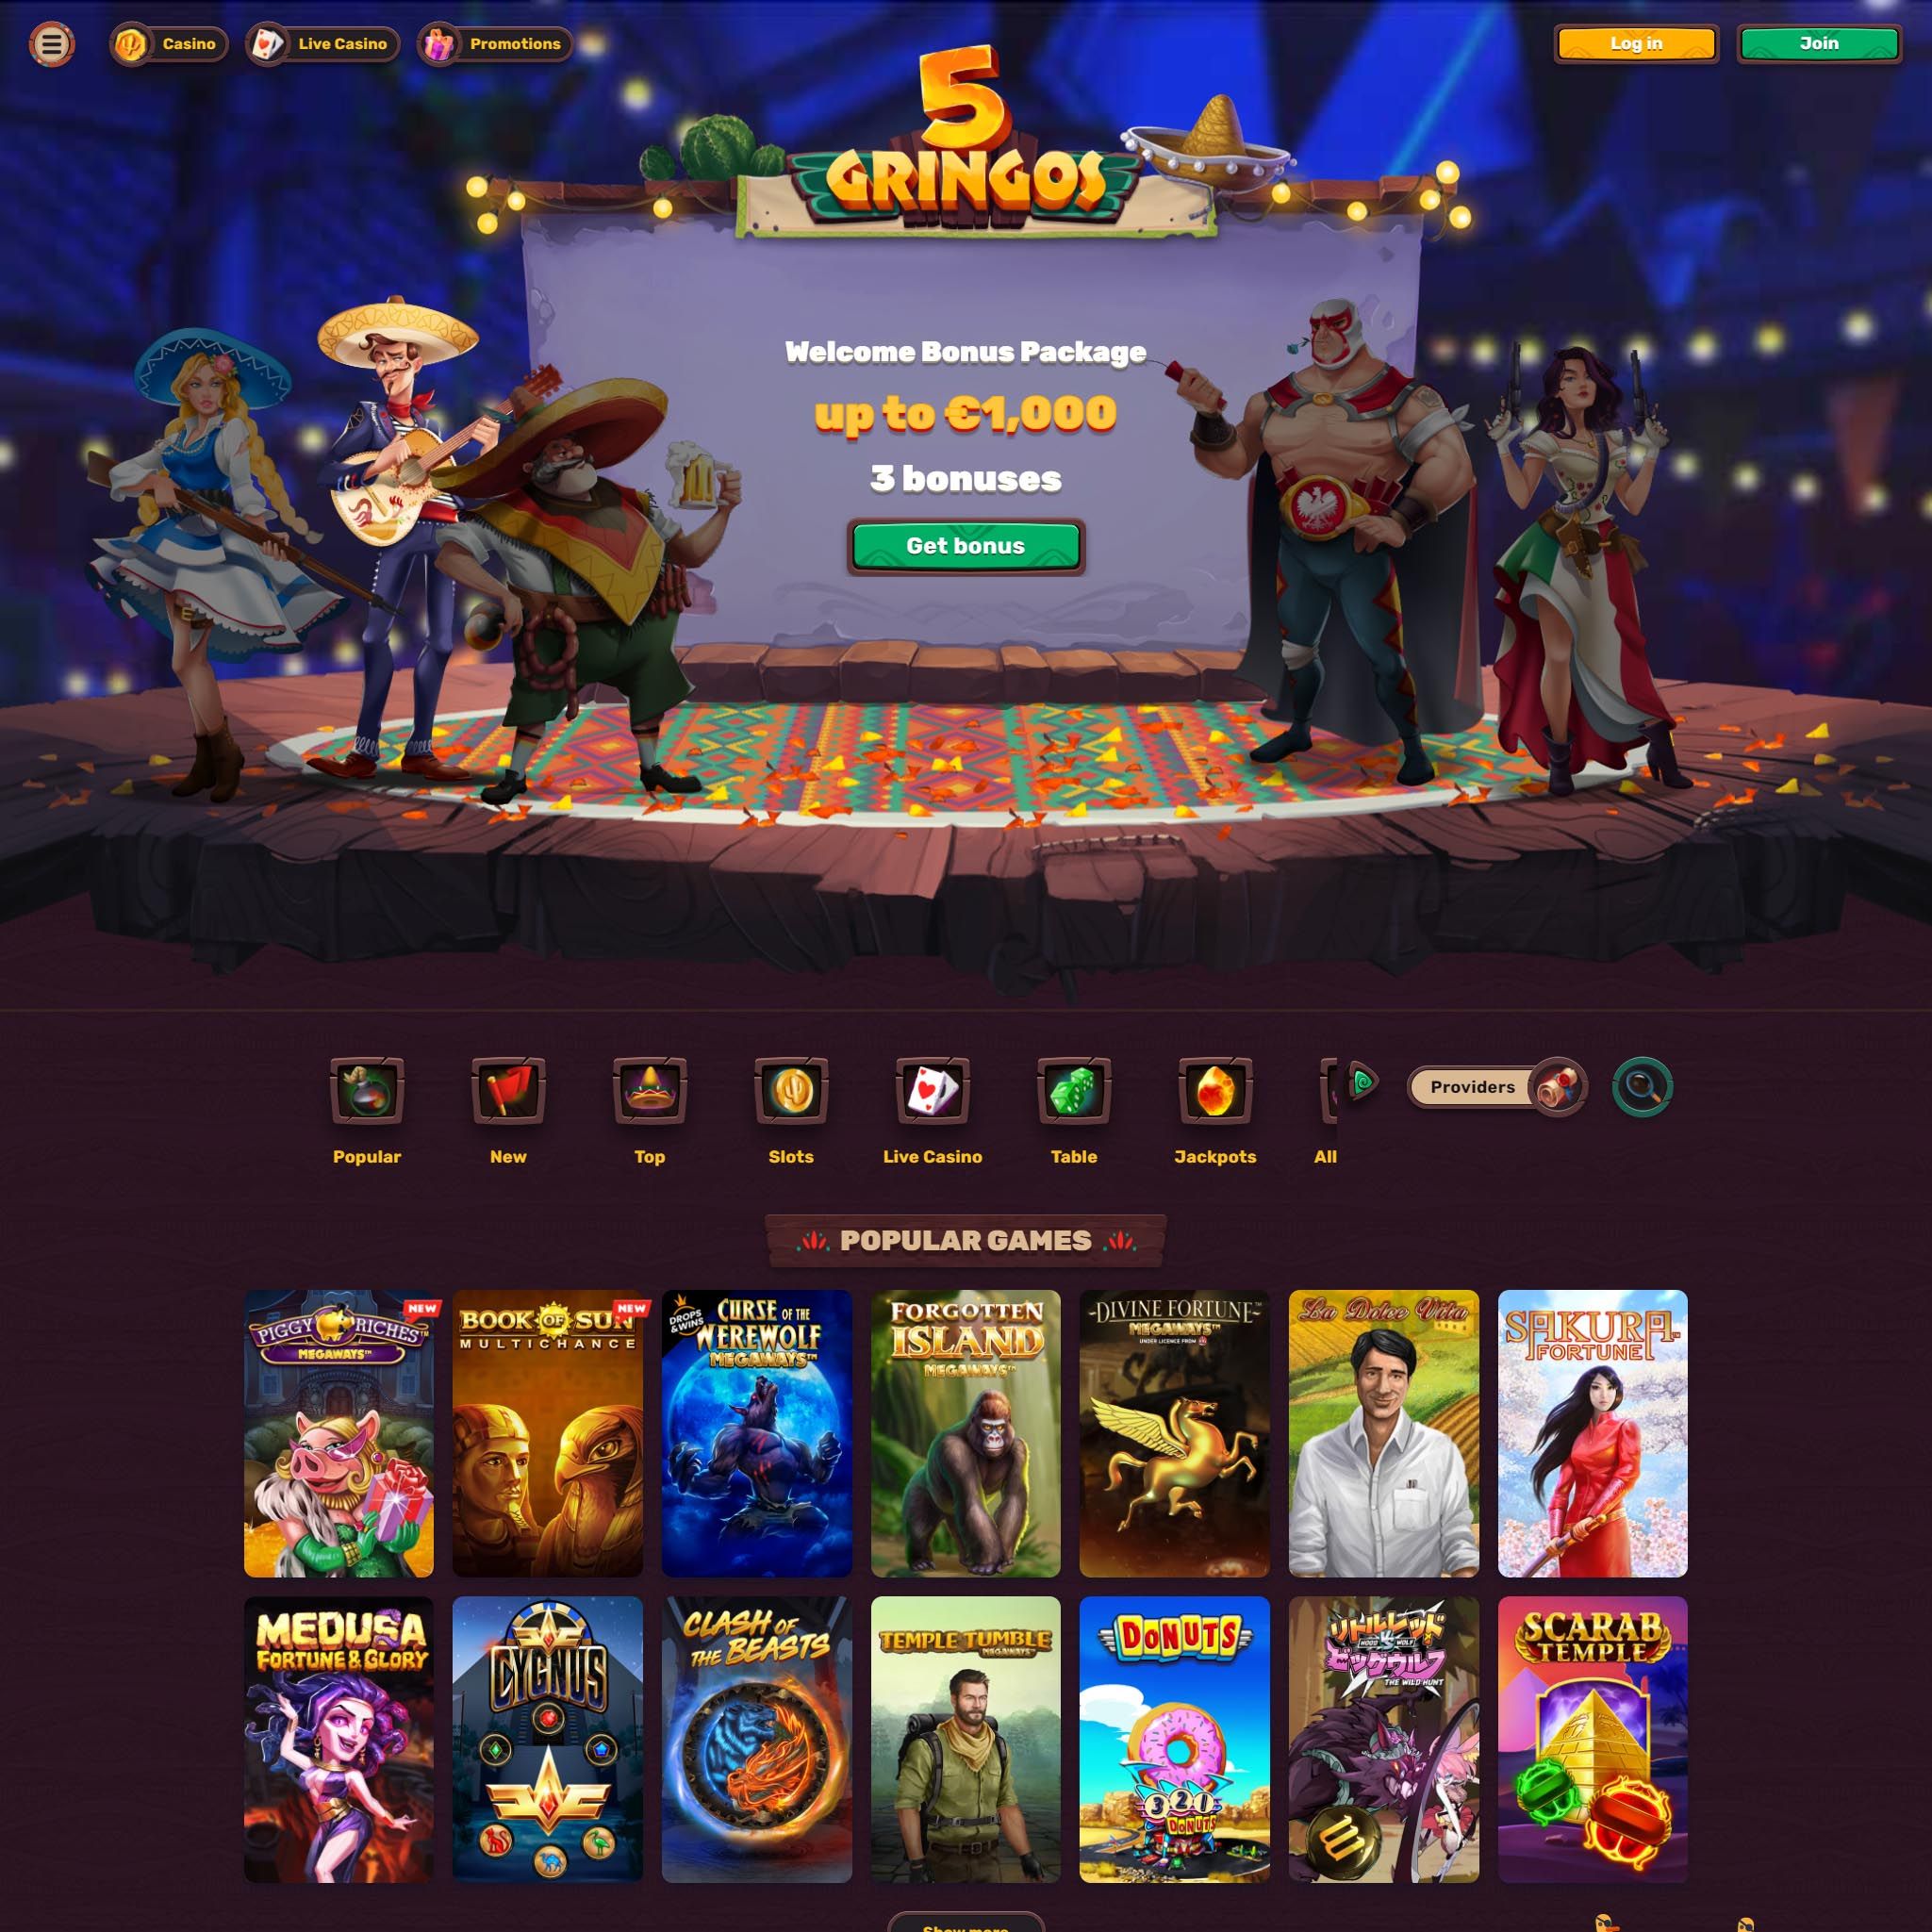 5Gringos Casino review by Mr. Gamble